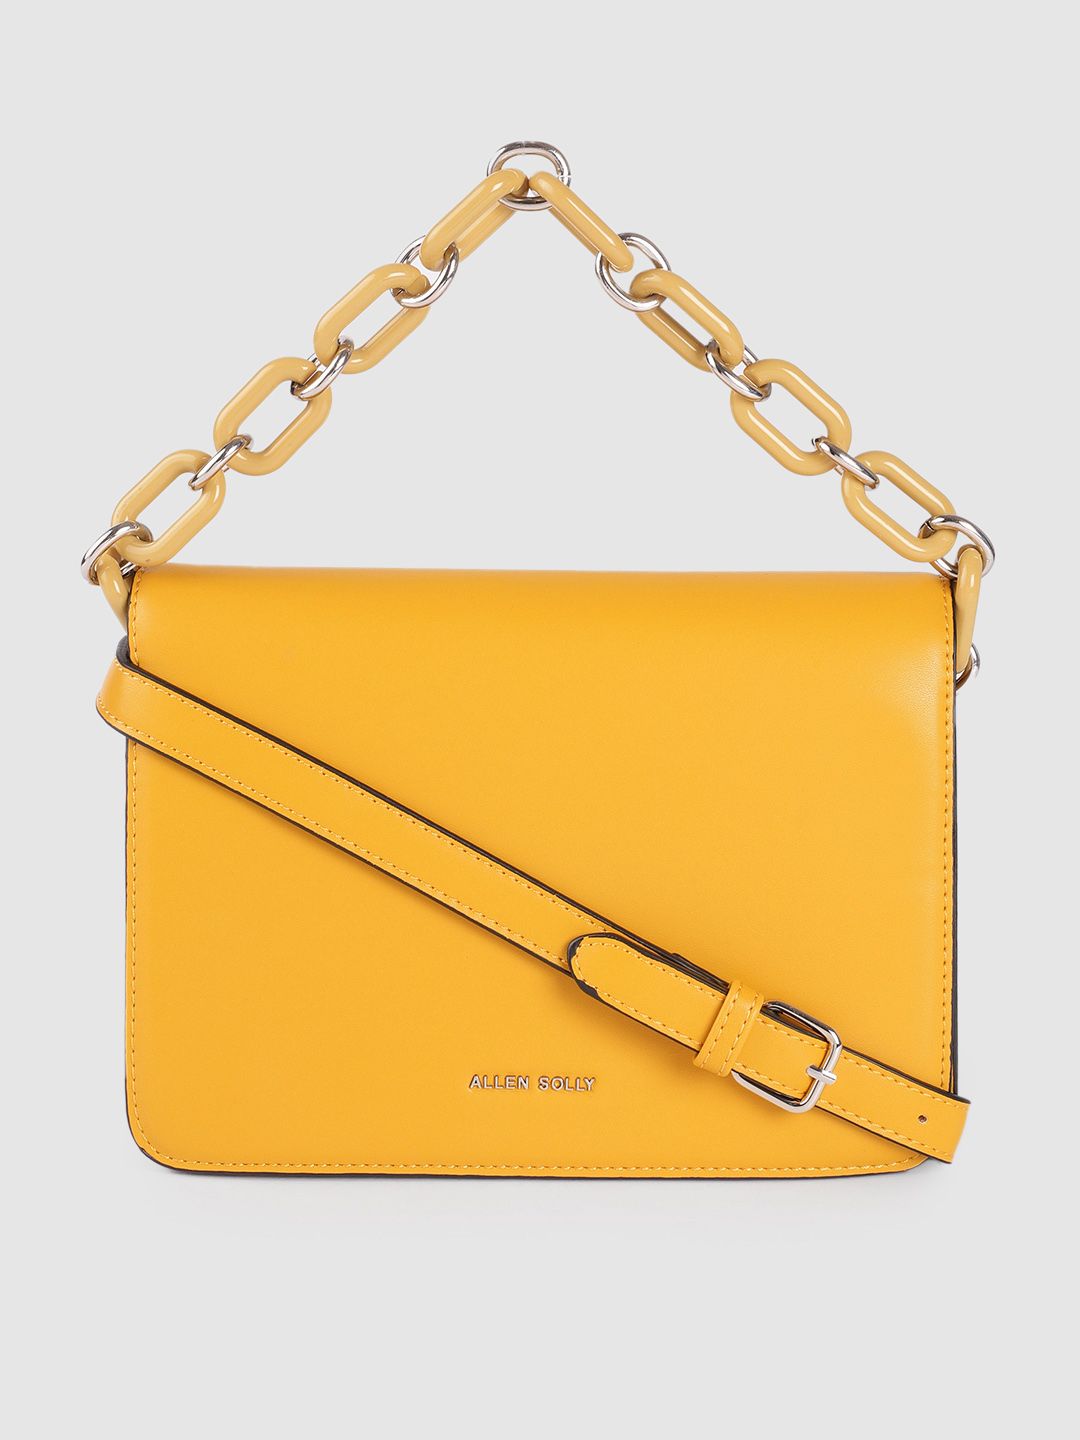 Allen Solly Yellow PU Structured Handheld Bag Price in India